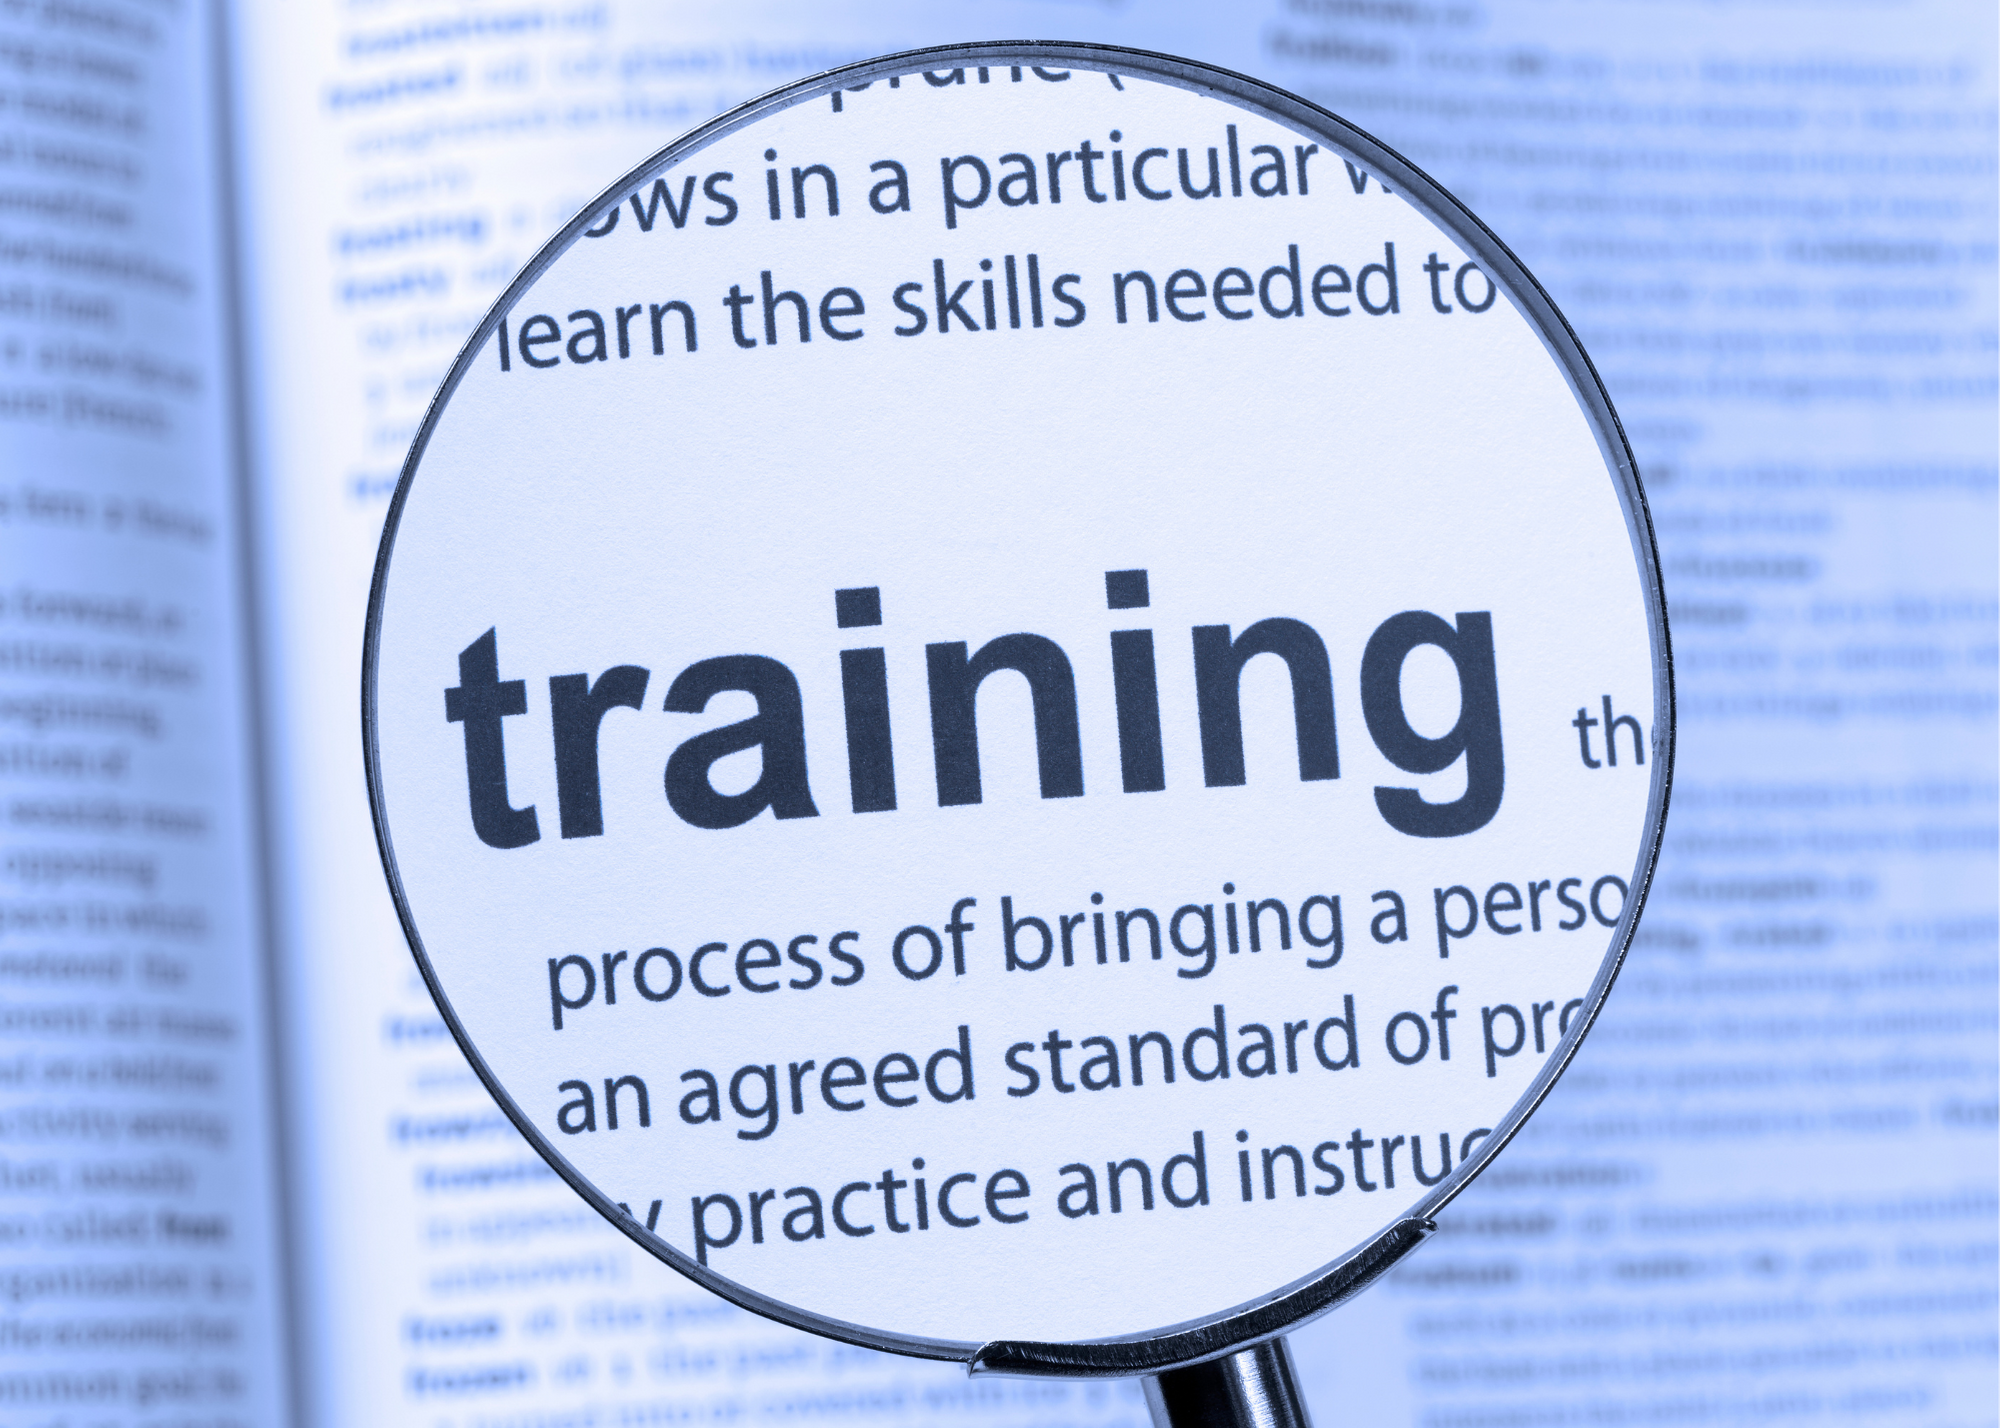 Are you meeting required training 